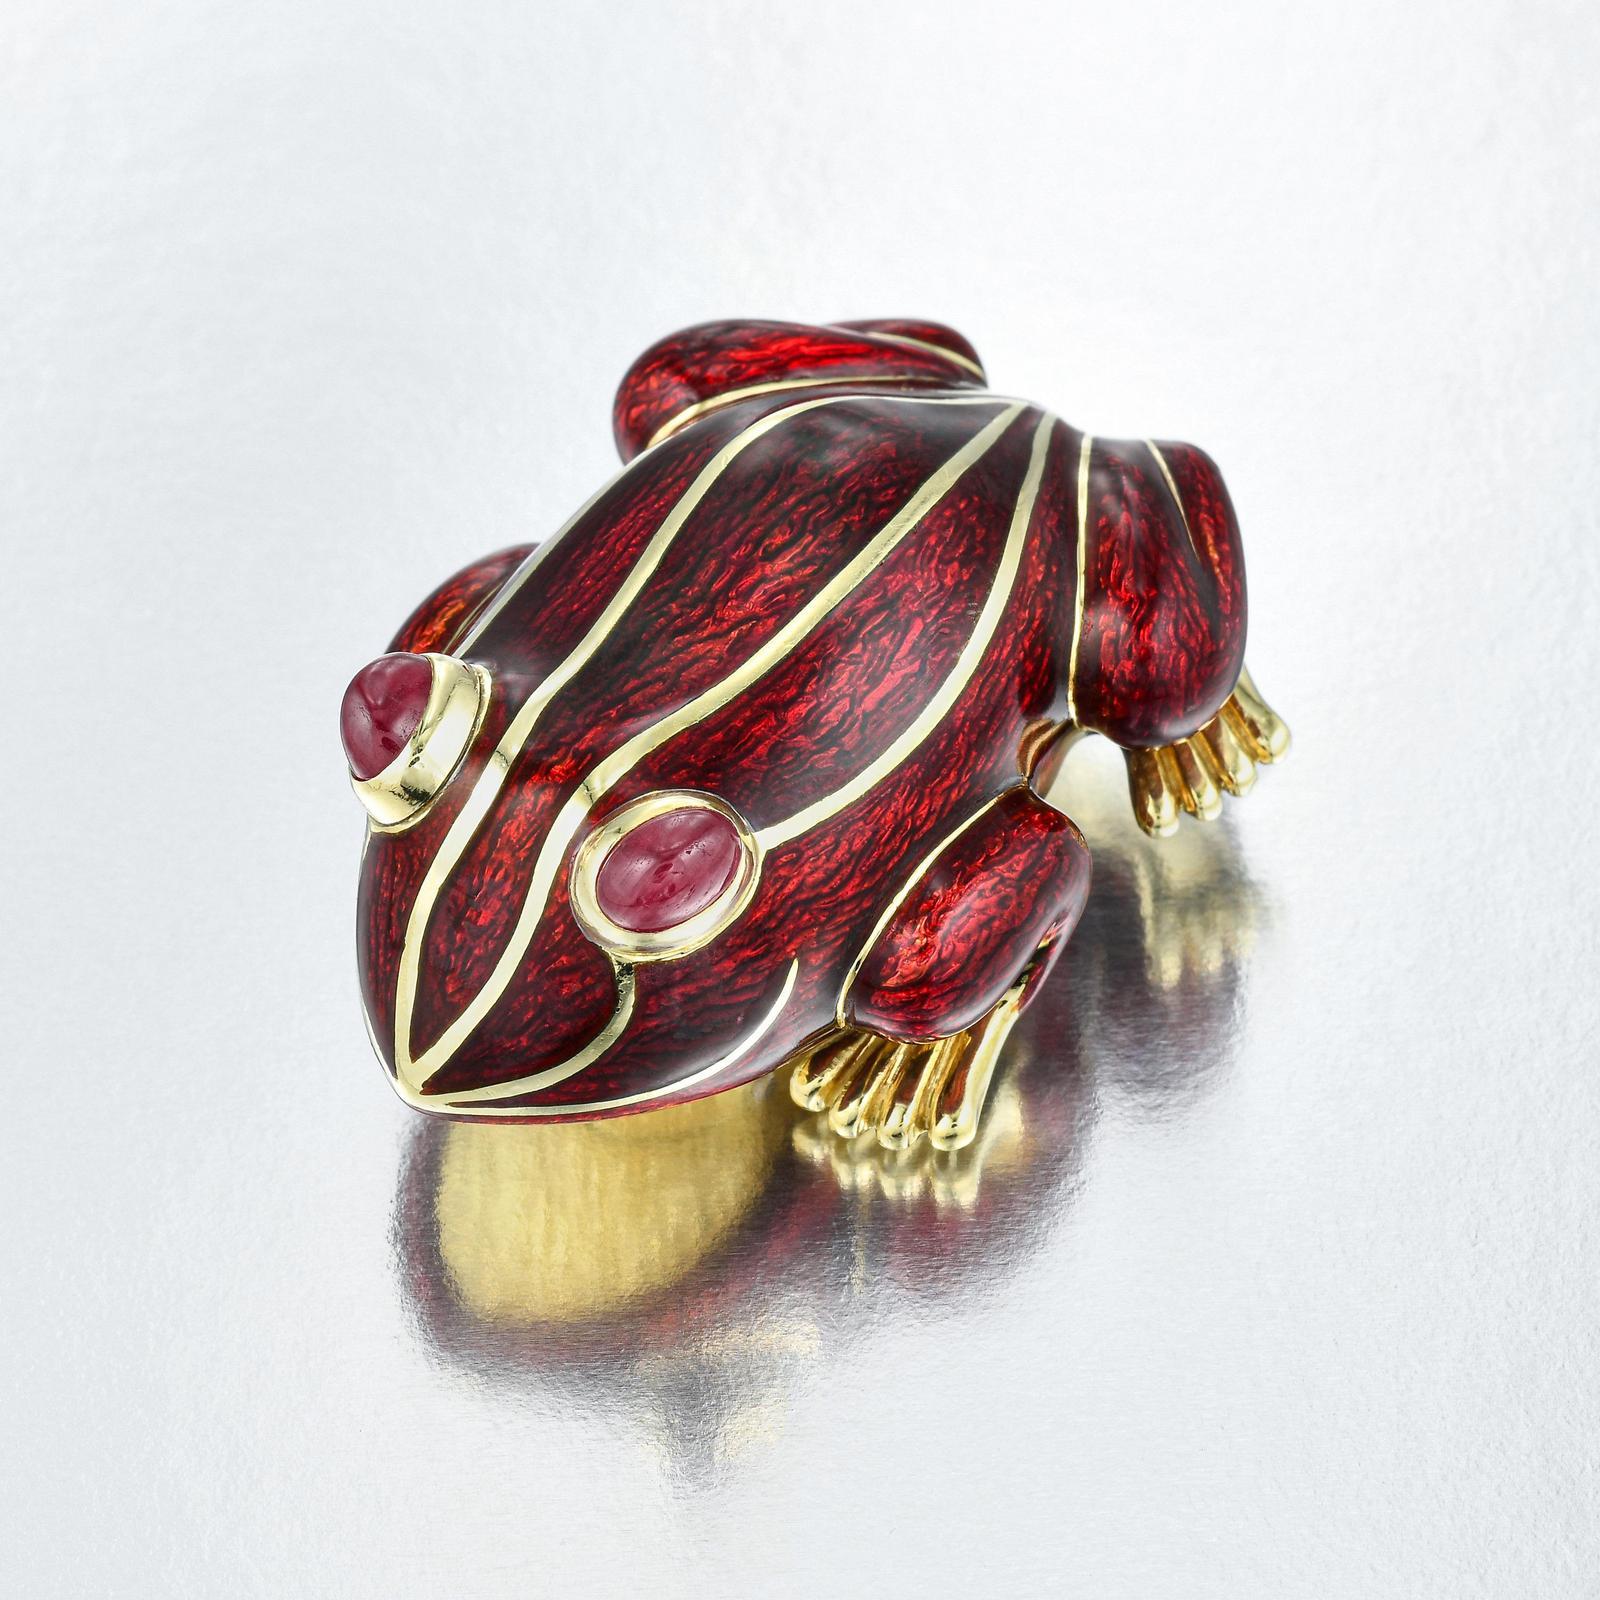 Fantastic brooch artfully sculptured in 18K yellow gold with applied with deep dark red enamel and highlighted with 18K inlaid gold accents
Oval Ruby cabochon eyes set in bezels slightly above the surface
Underside completed with double pin clip